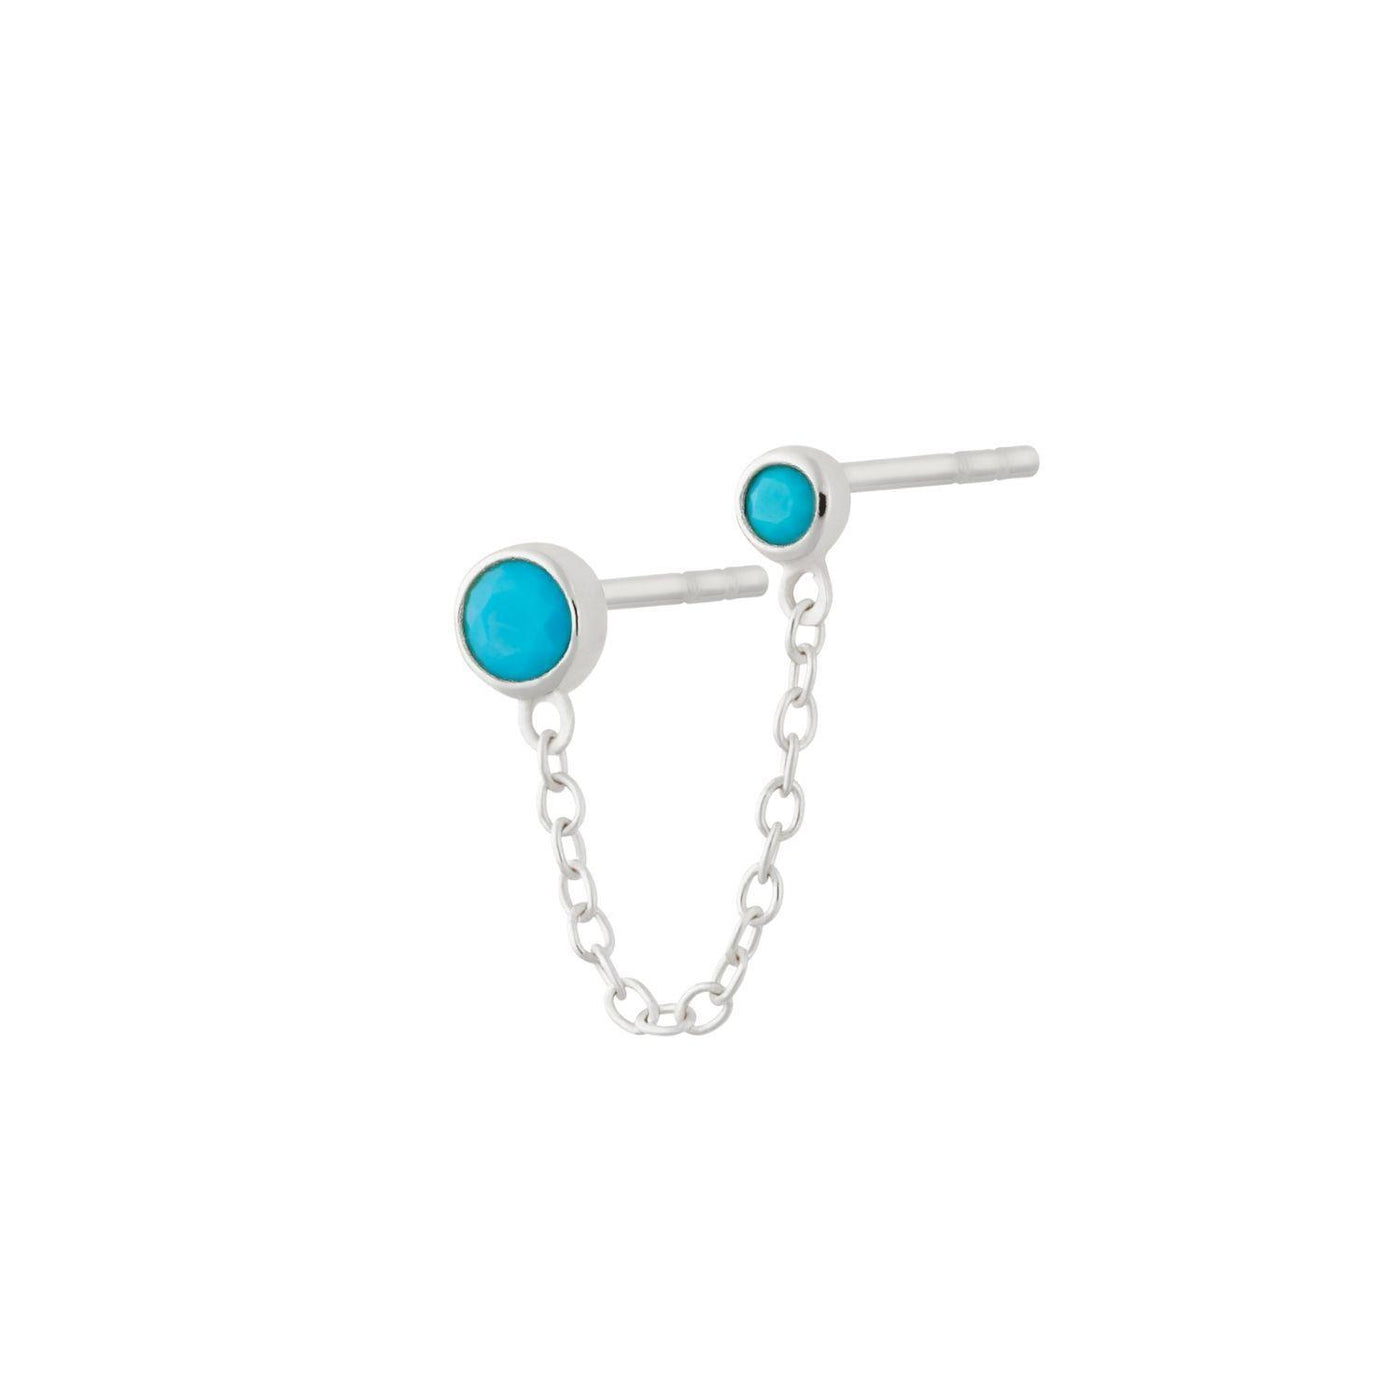 Scream Pretty Turquoise Double Stud Single Earring with Chain Connector - Rococo Jewellery